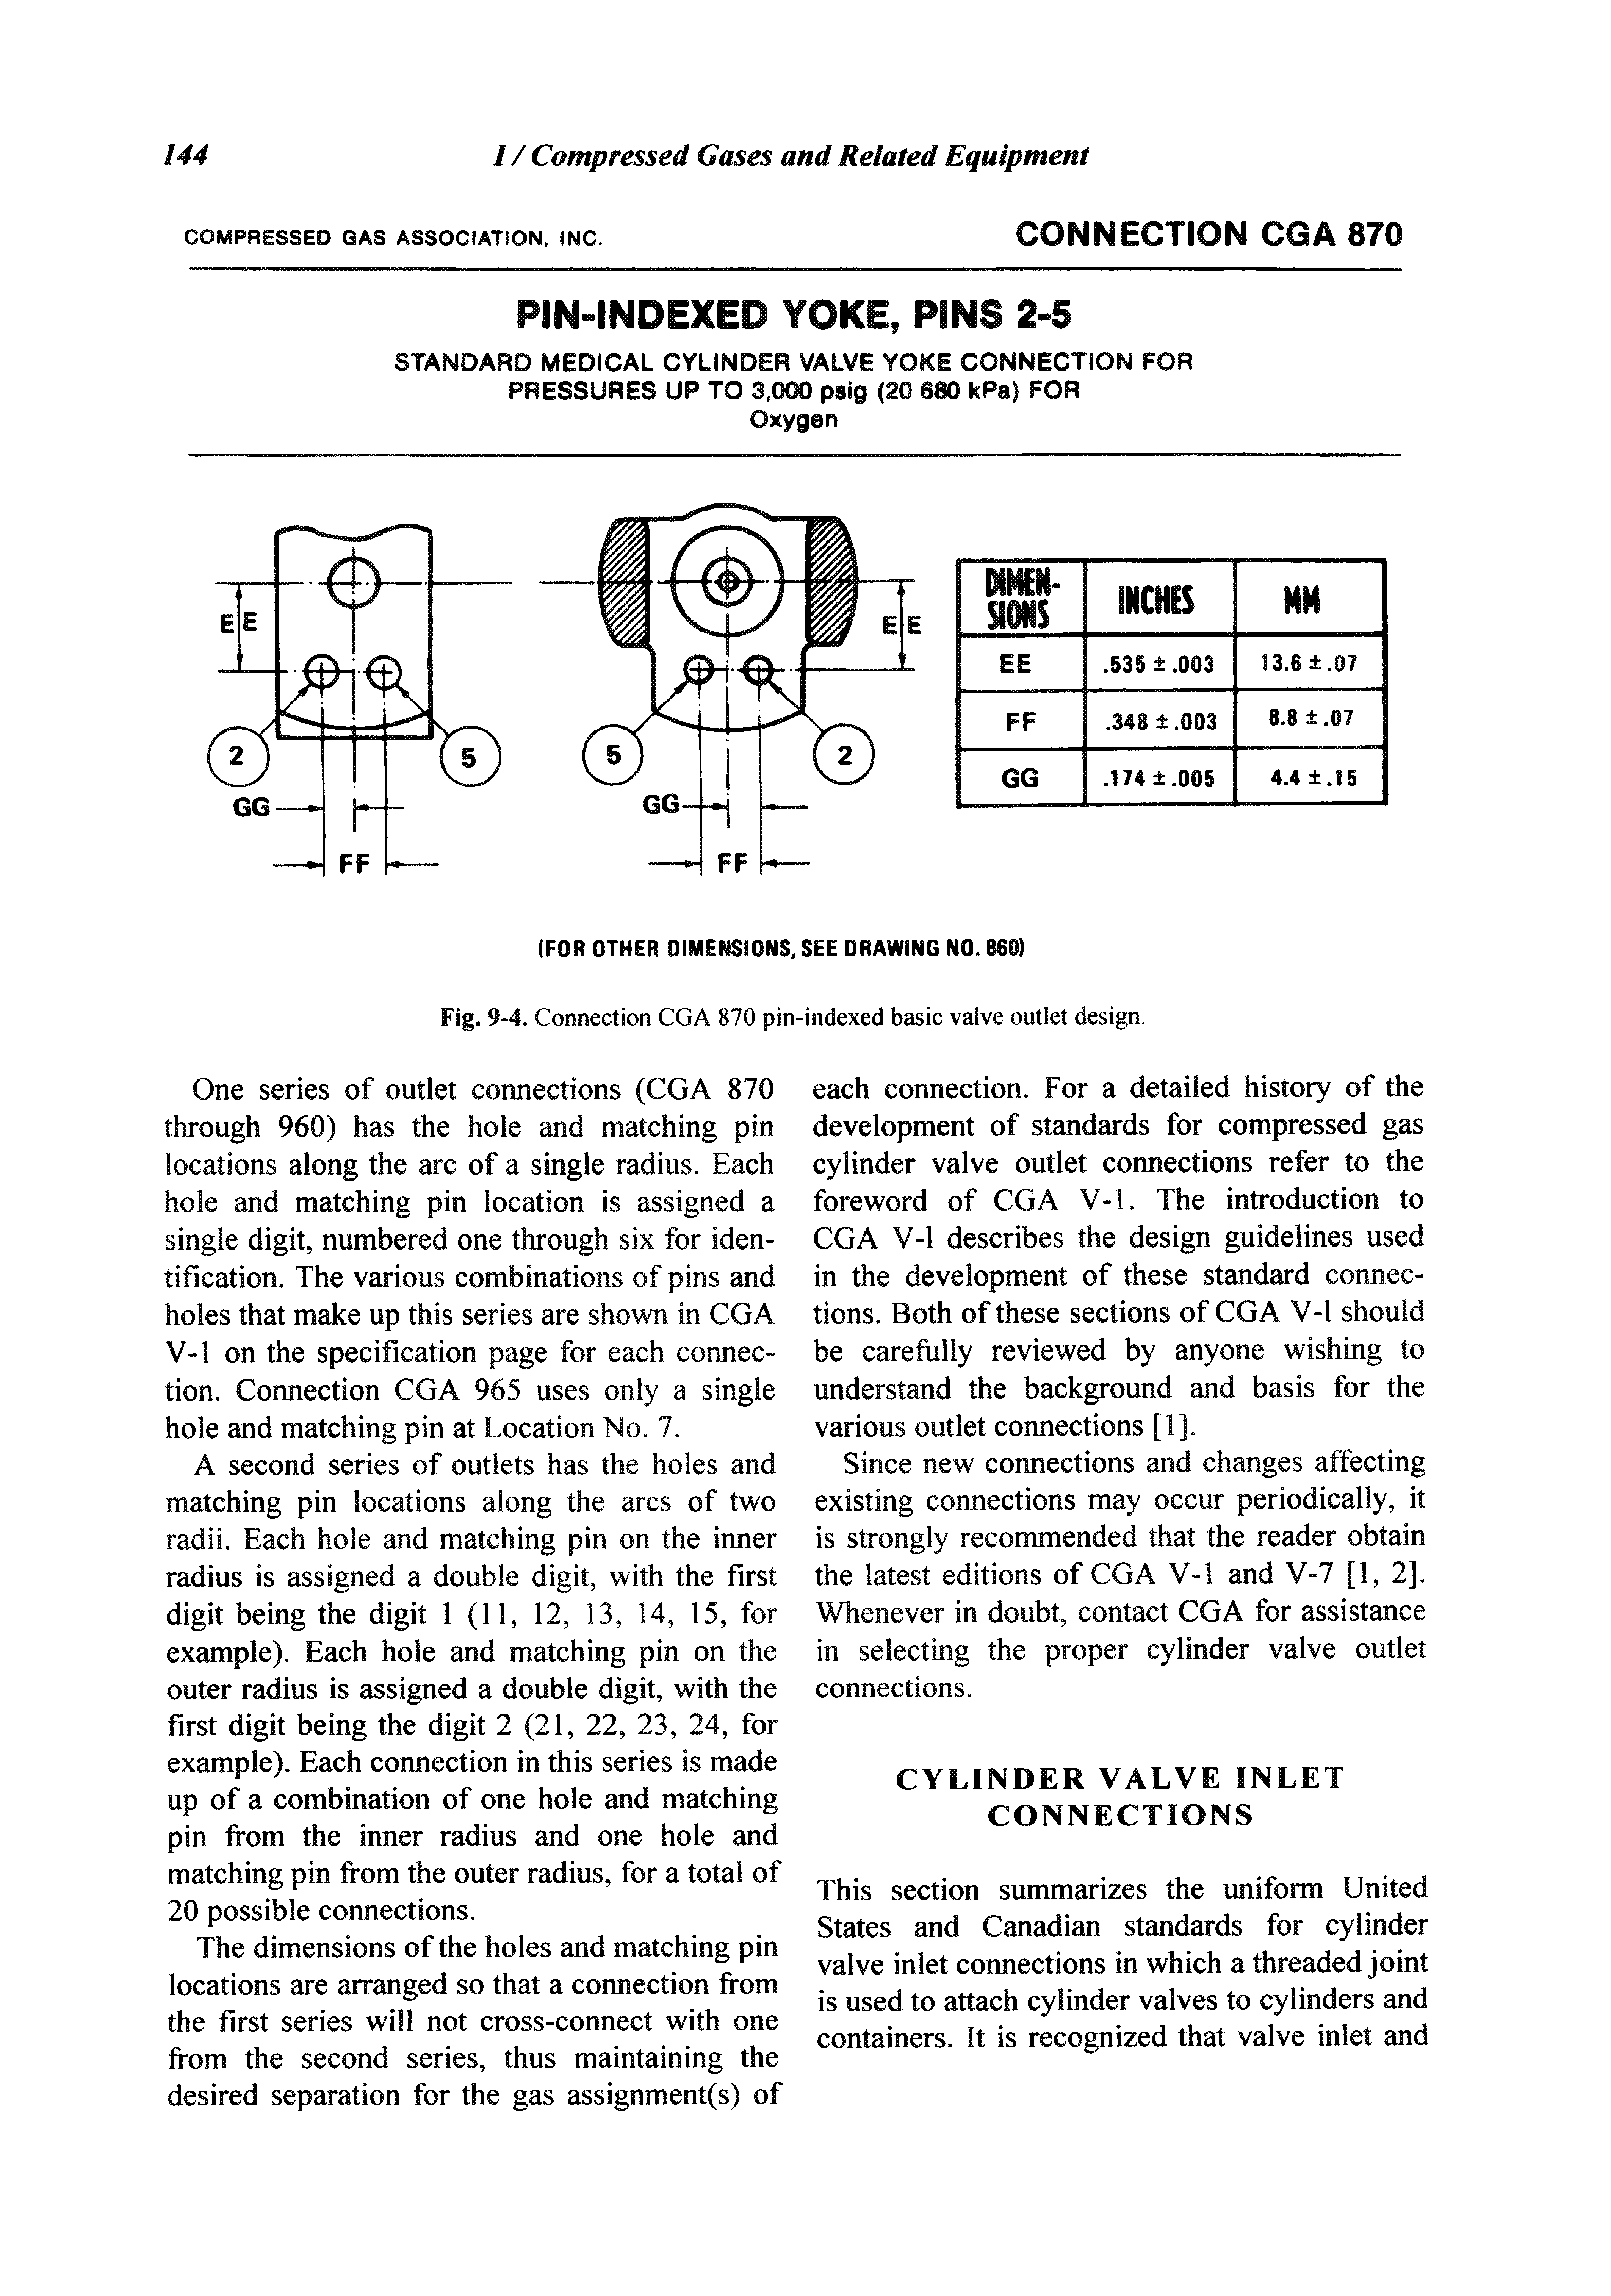 Fig. 9-4. Connection CGA 870 pin-indexed basic valve outlet design.